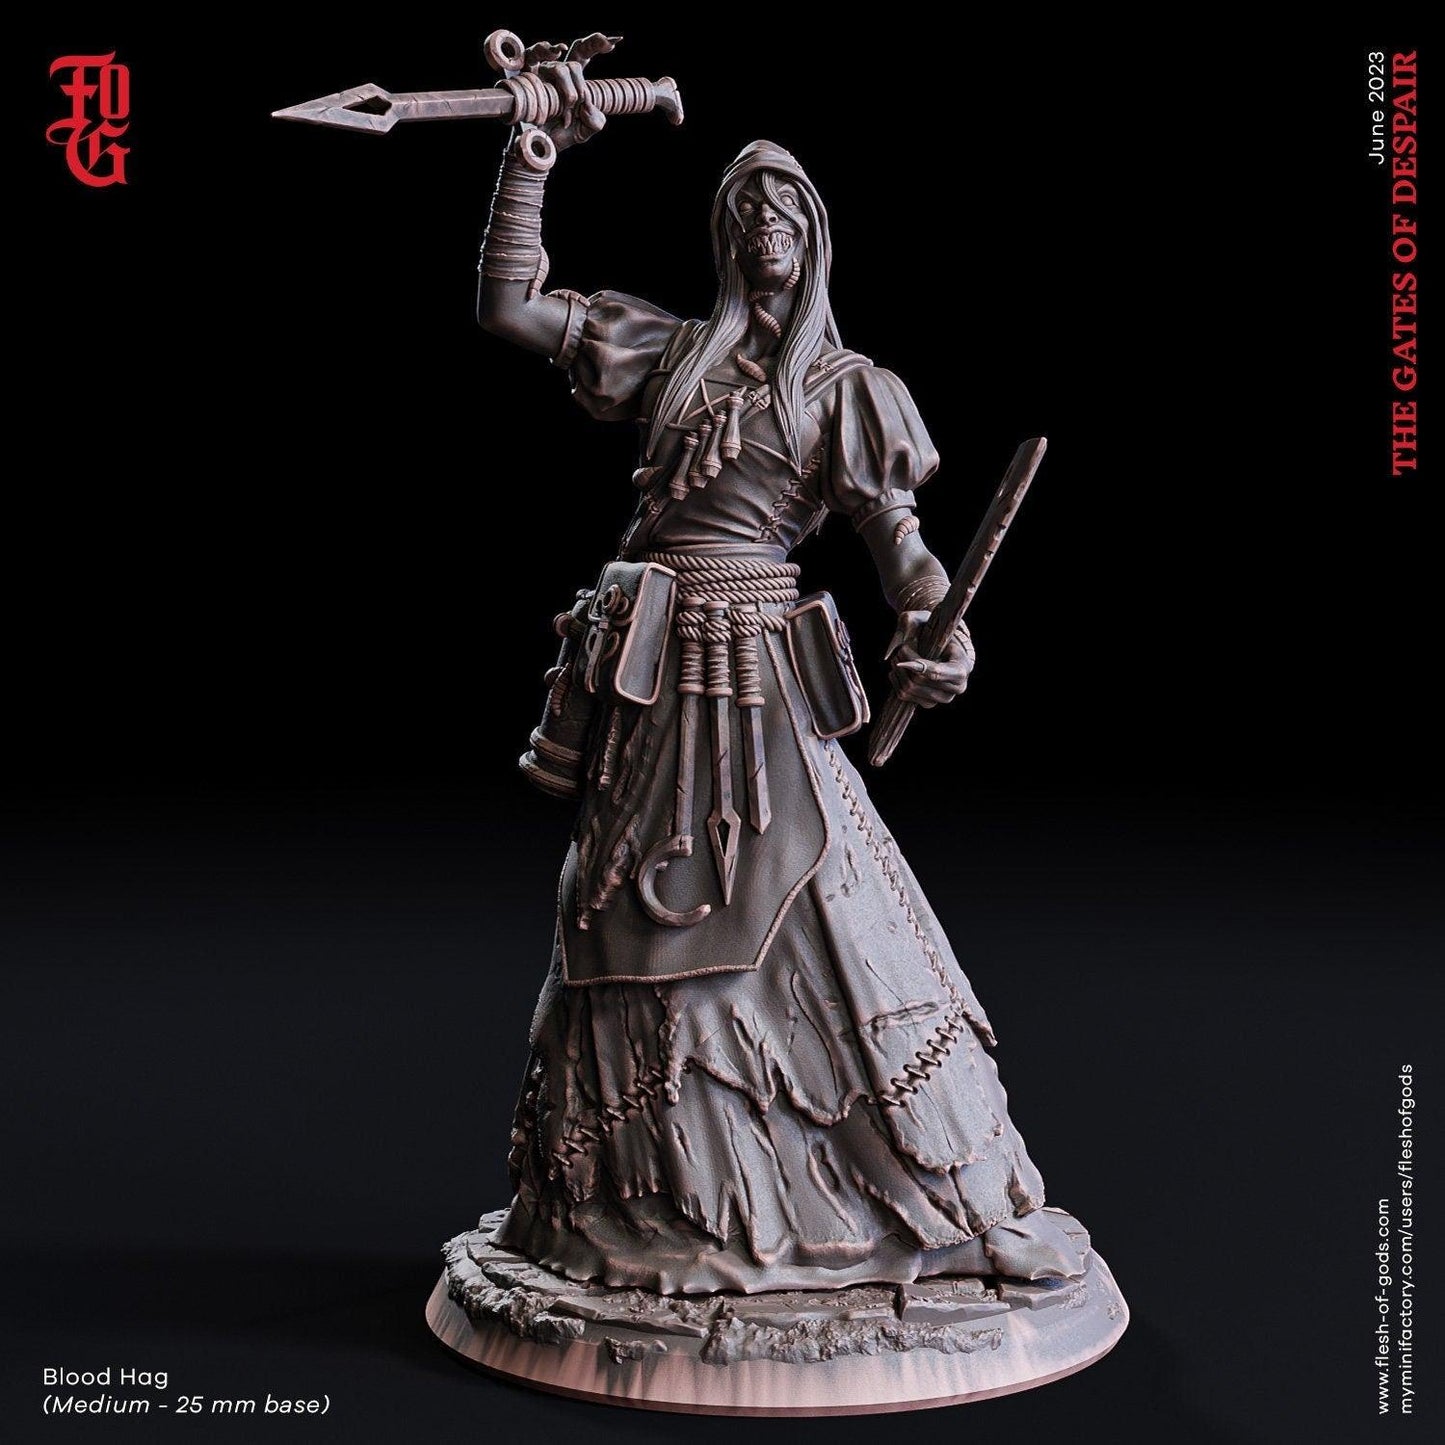 Blood Hag Bust | Witch Statue Tabletop Gaming Figure | Dungeons and Dragons DnD 5e - Plague Miniatures shop for DnD Miniatures